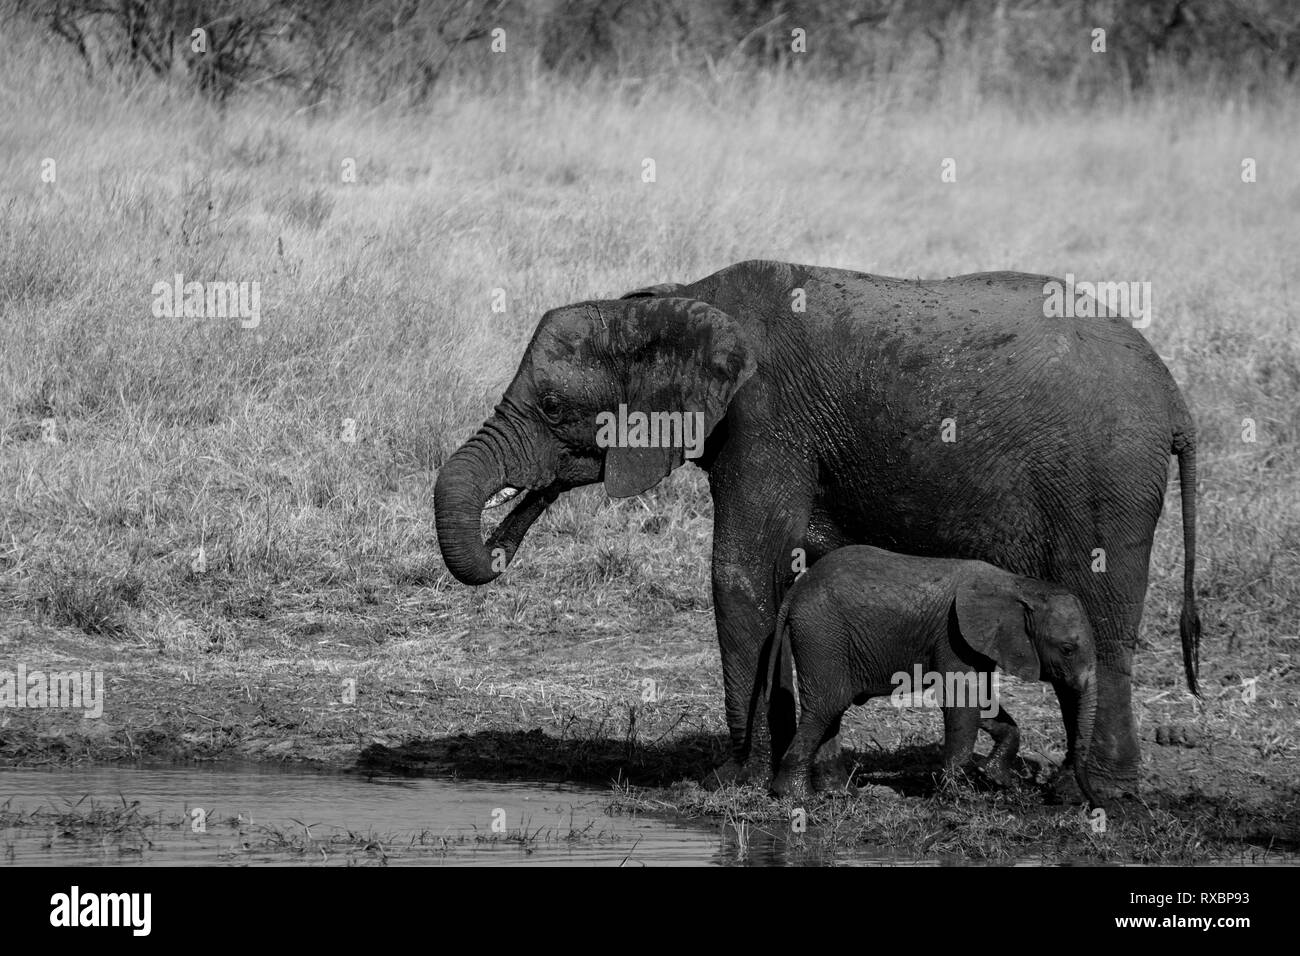 A mother and calf elephant drinking from a waterhole in Hwange National Park, Zimbabwe. In black and white Stock Photo